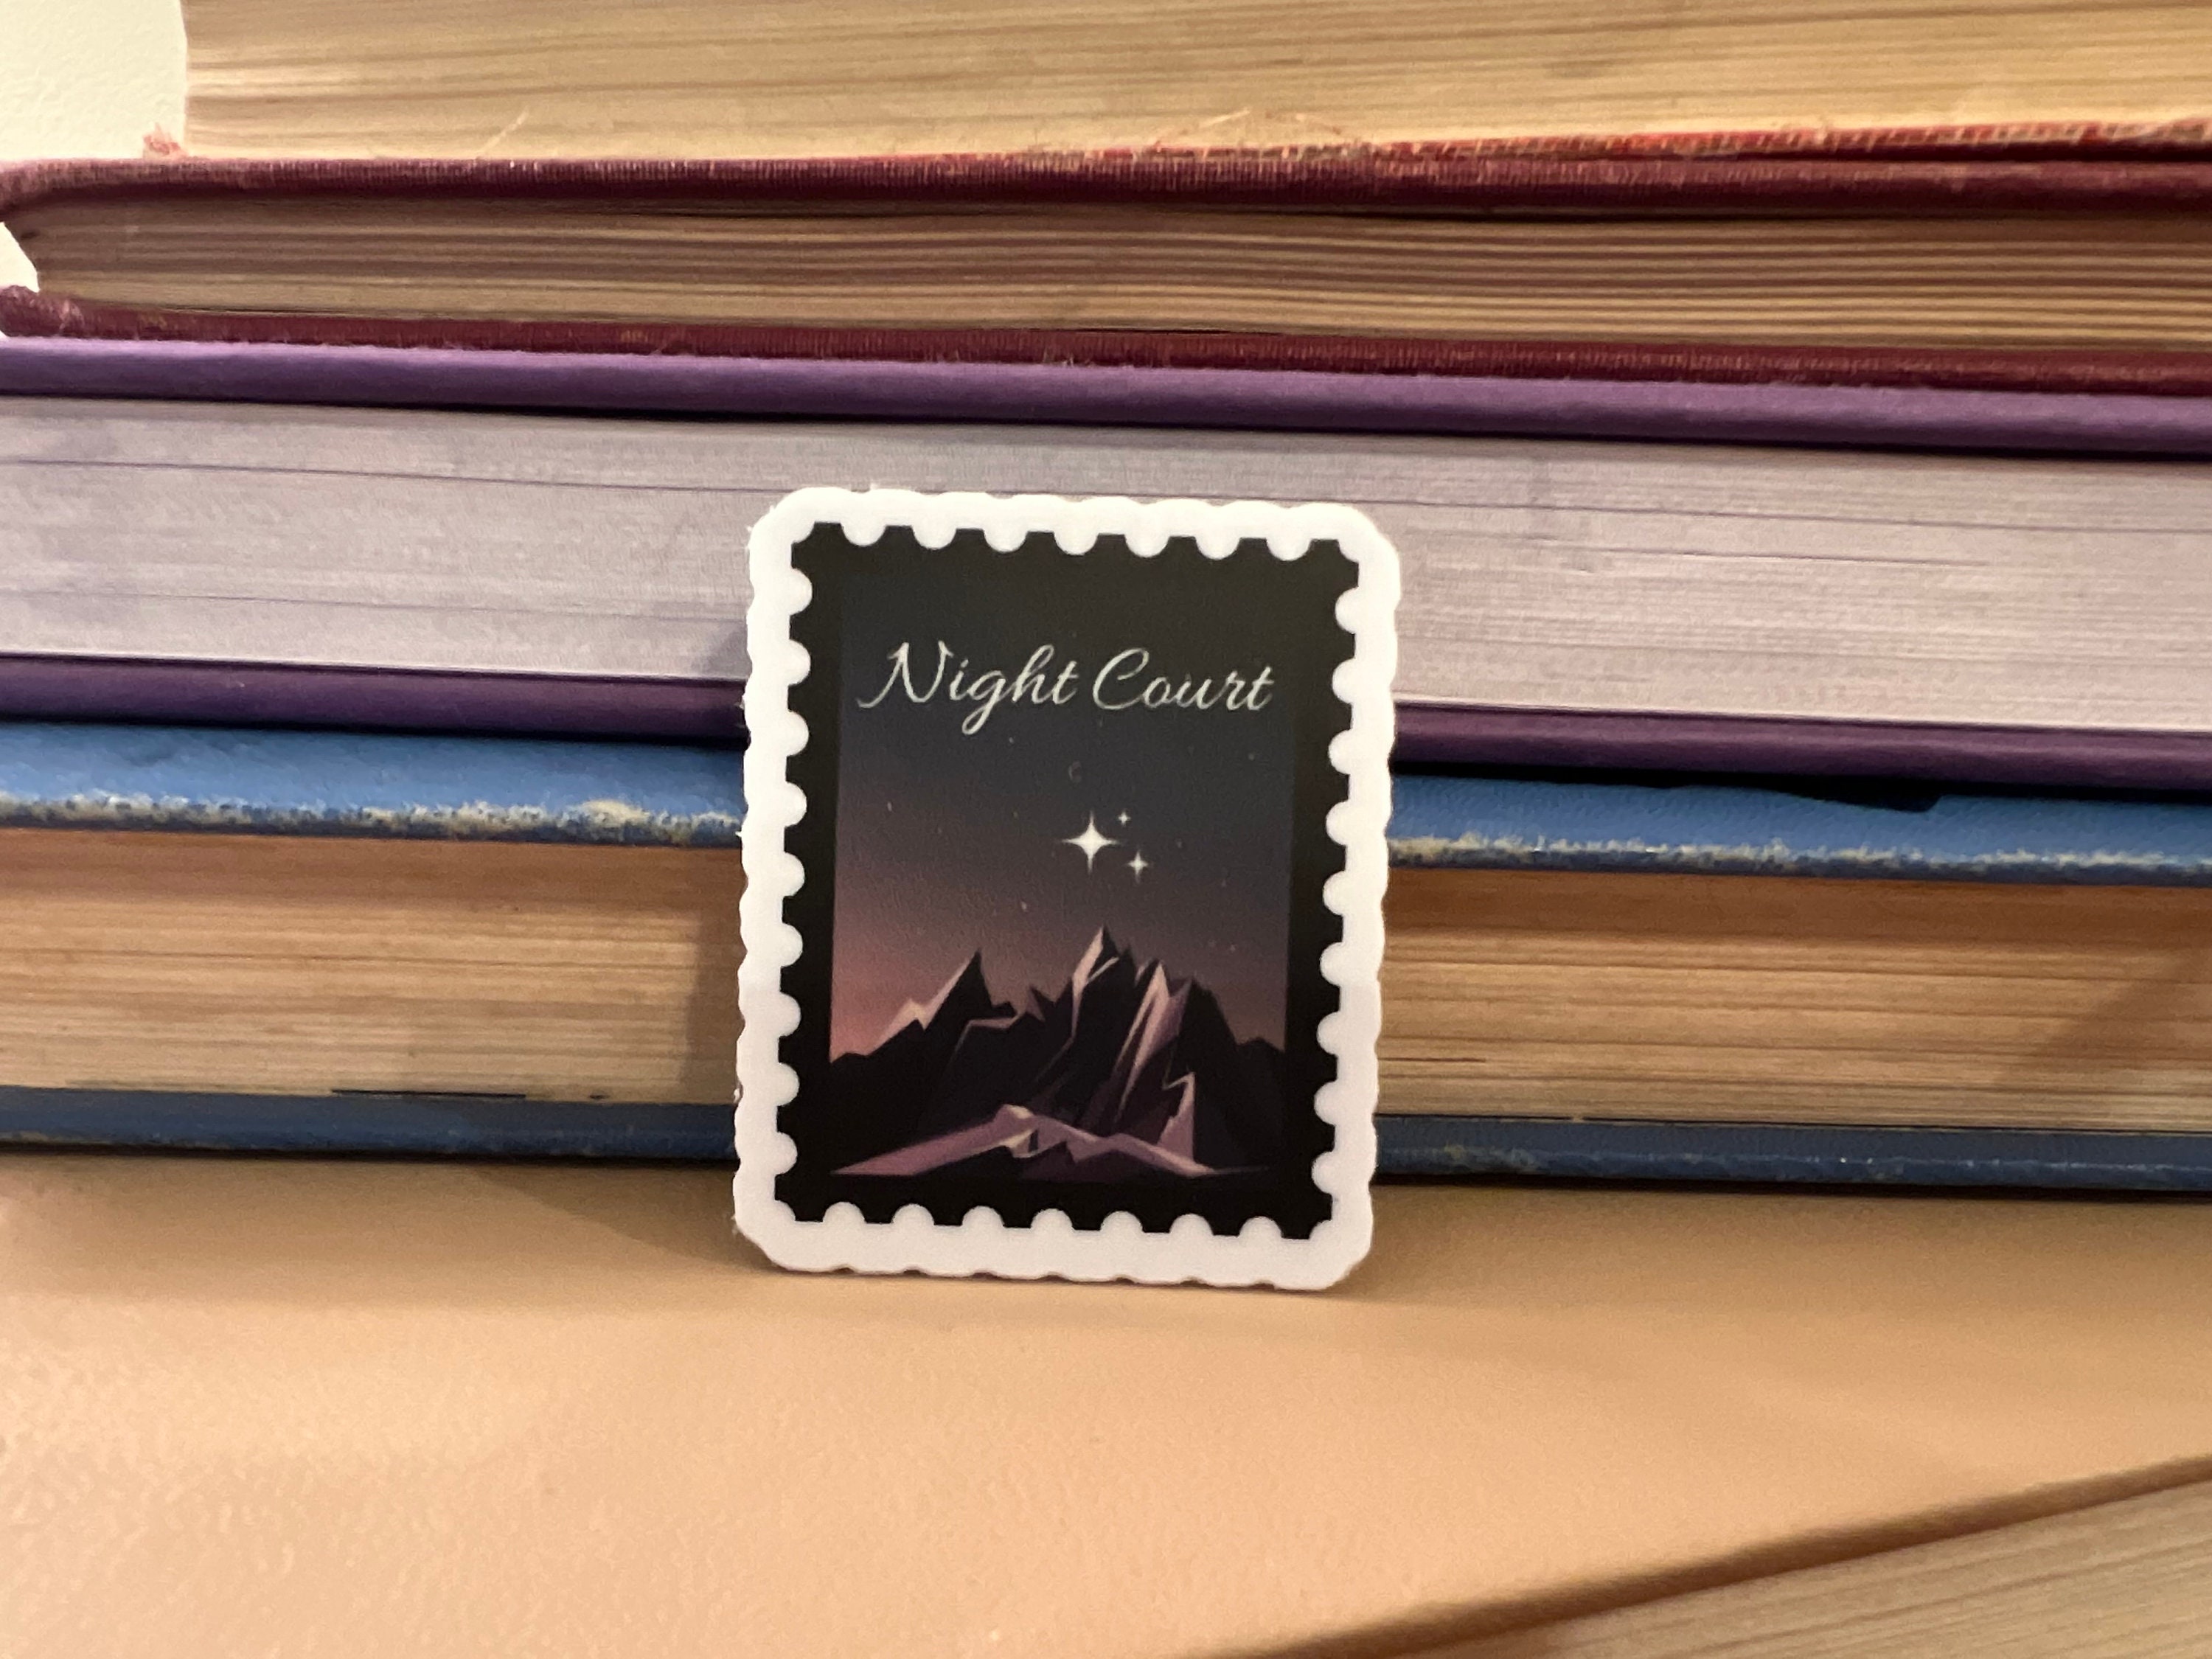 ACOTAR Book Gift Custom Book Embosser to Personalize Library Books to the  Stars Who Listen Quote, Velaris Night Court Designs and More 